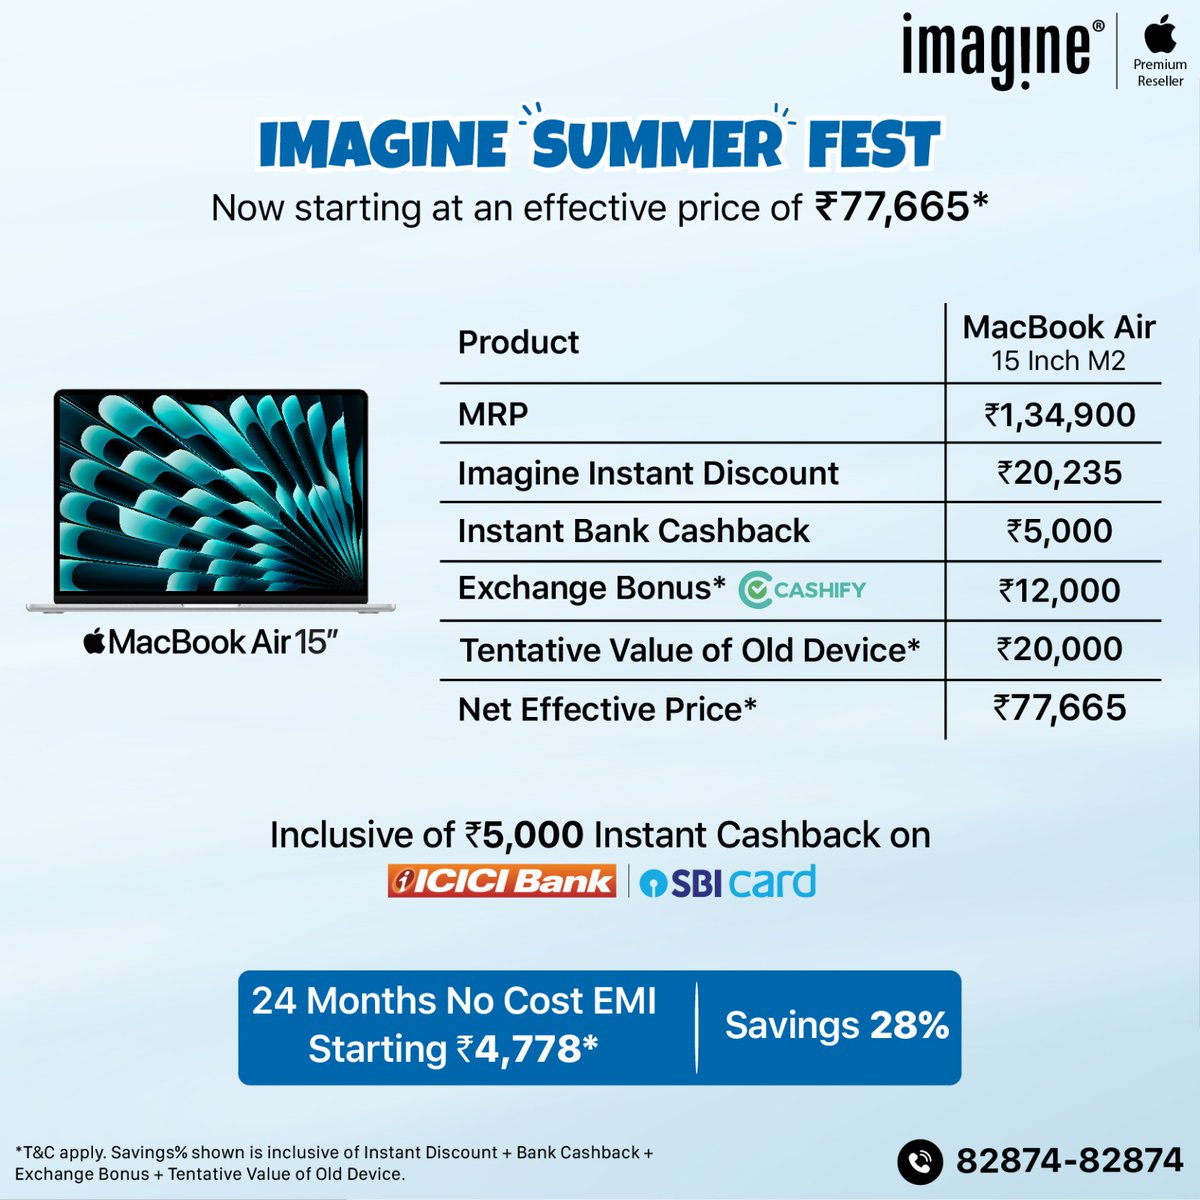 Celebrate Summer at Imagine: Exclusive Apple Deals Await! 🌞 MacBook Air starting at an effective price of ₹36,900* ✅ Upto ₹5,000* Instant Cashback on select banks ✅ Upto ₹20,235* Instant In-store discount ✅ Upto ₹12,000* Exchange bonus ✅ GST Invoice available ✅ Upto 24